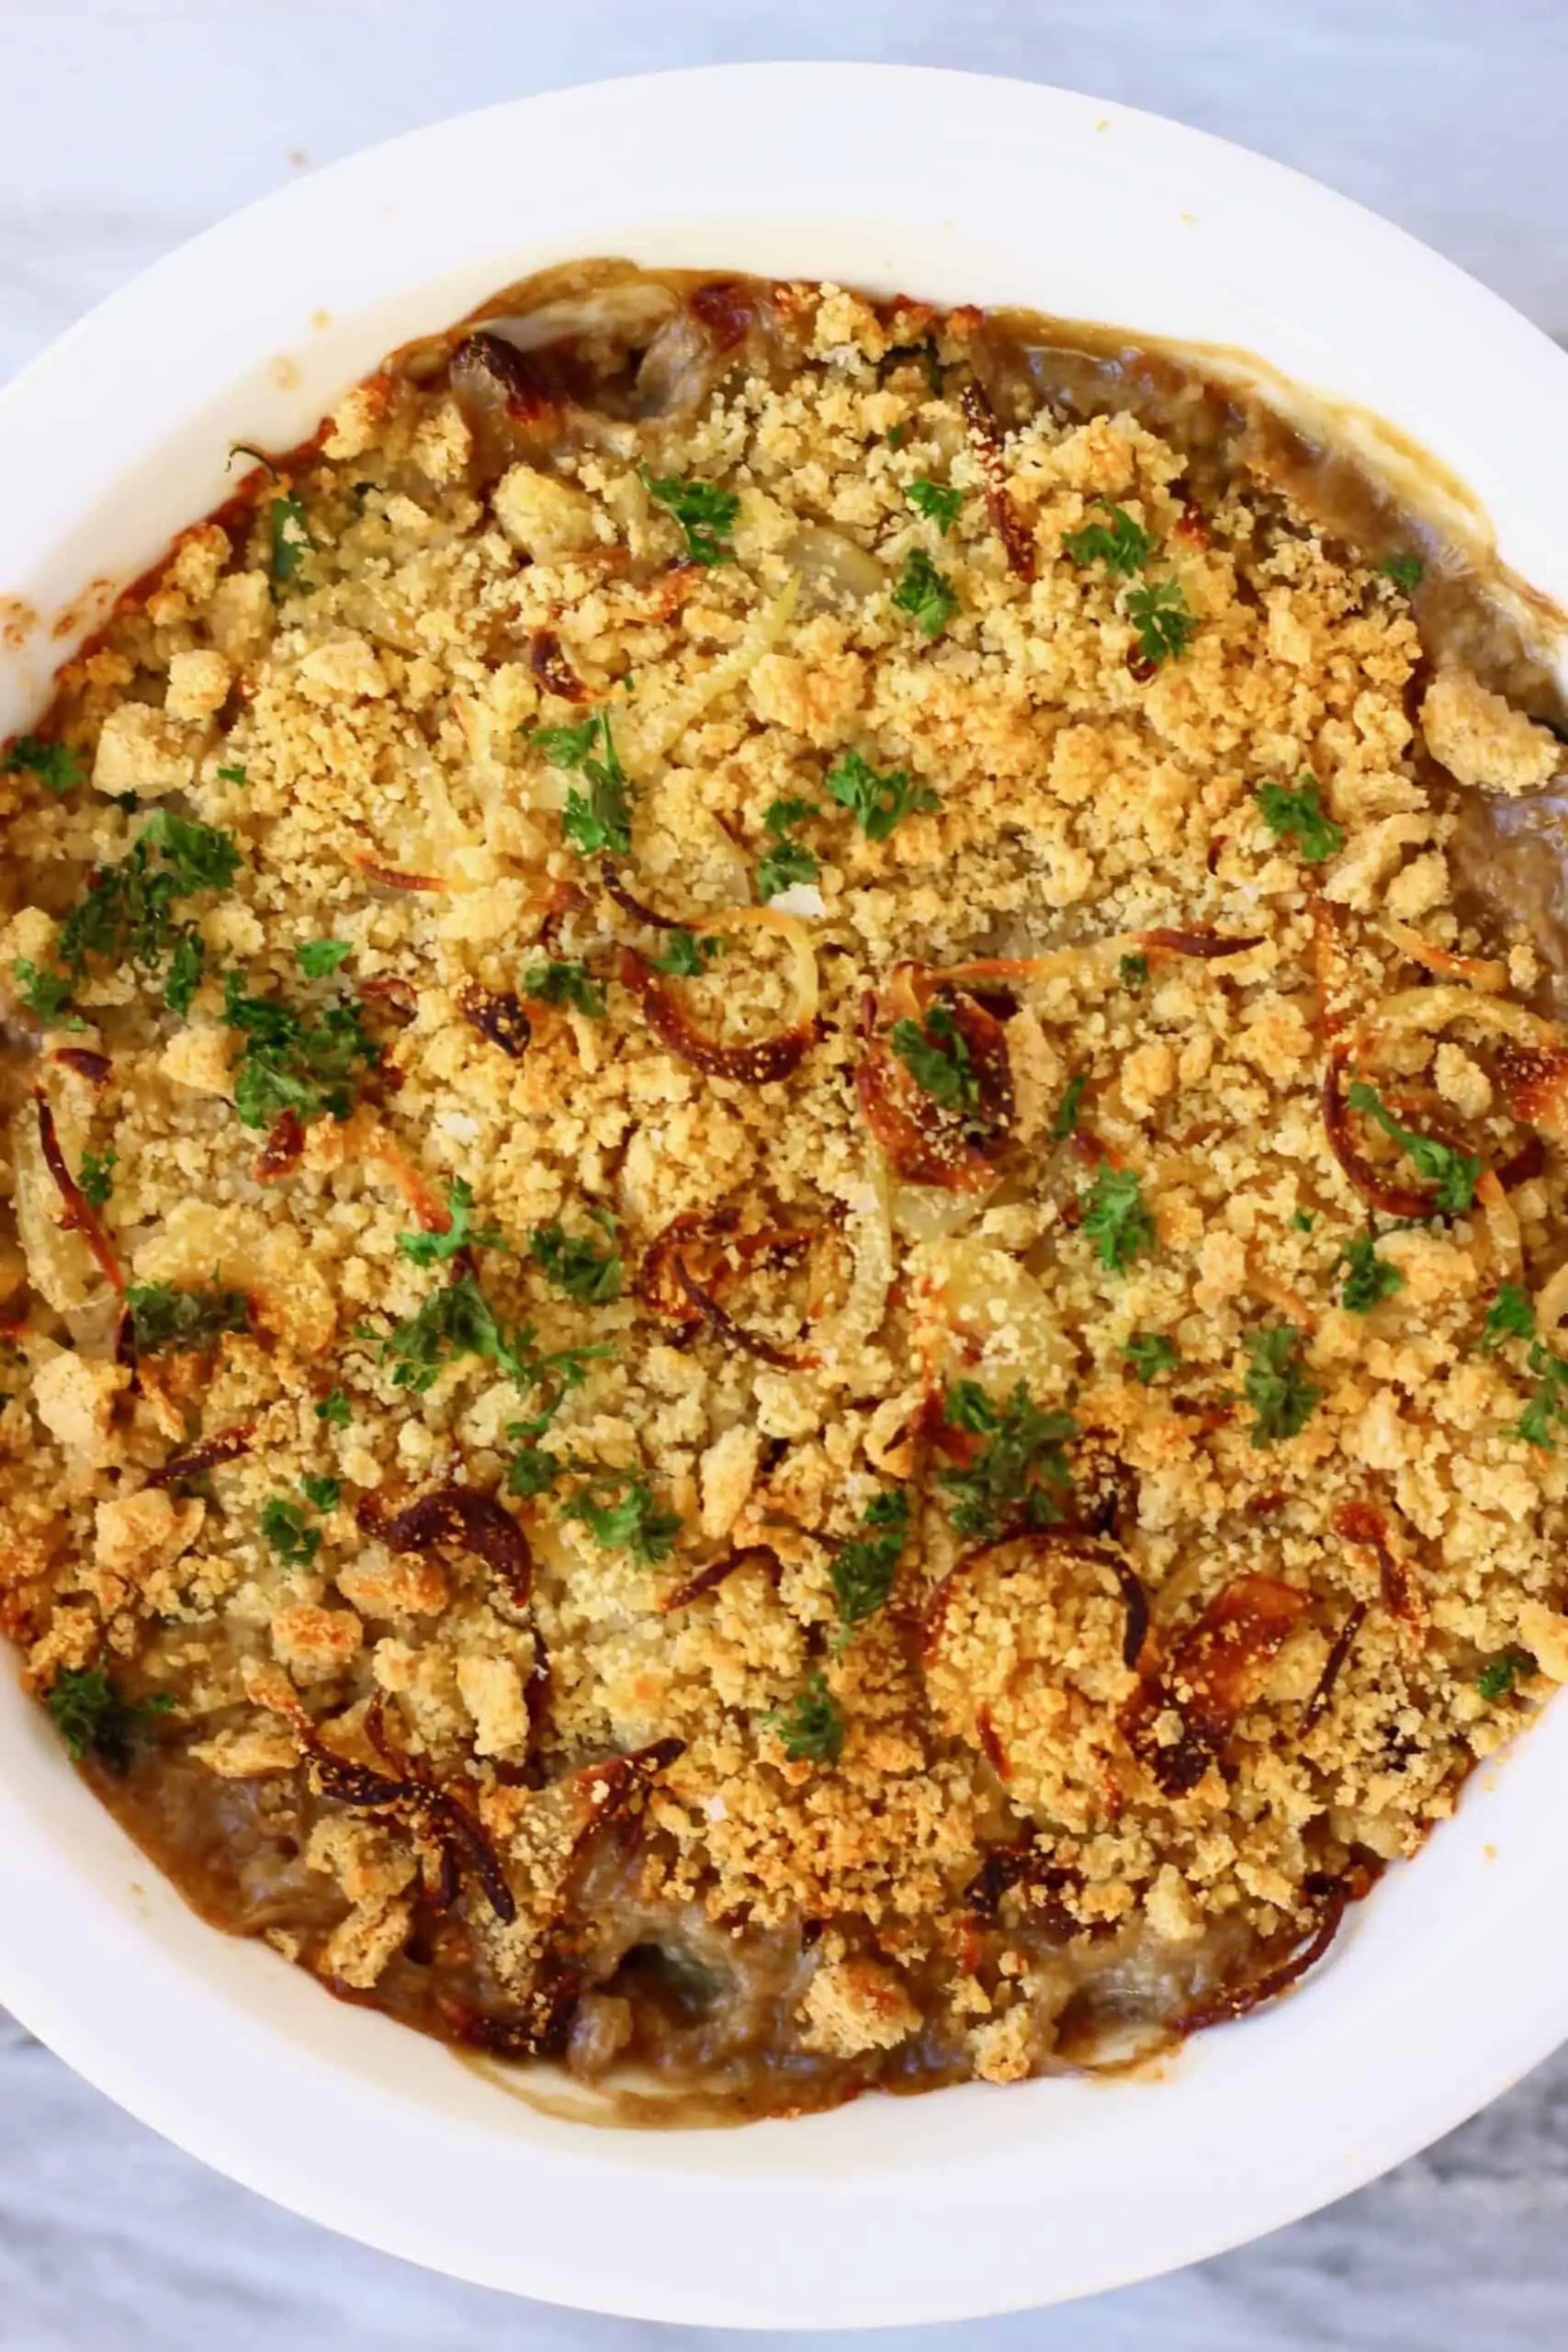 Vegan green bean casserole topped with golden brown breadcrumbs and green parsley in pie dish